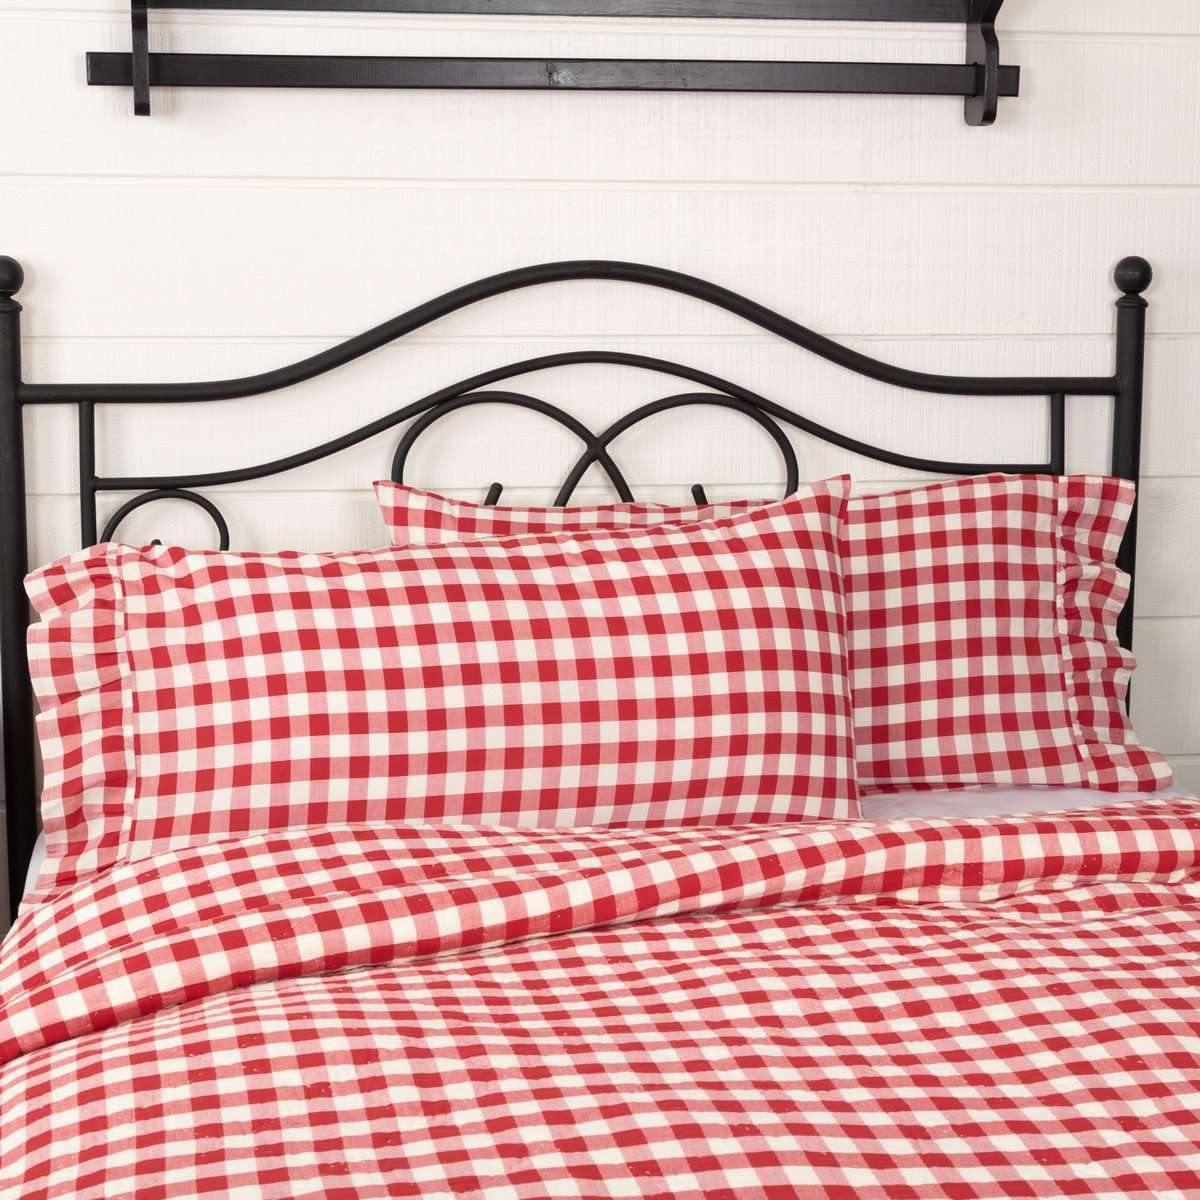 Annie Buffalo Red Check King Pillow Case Set of 2 21x40